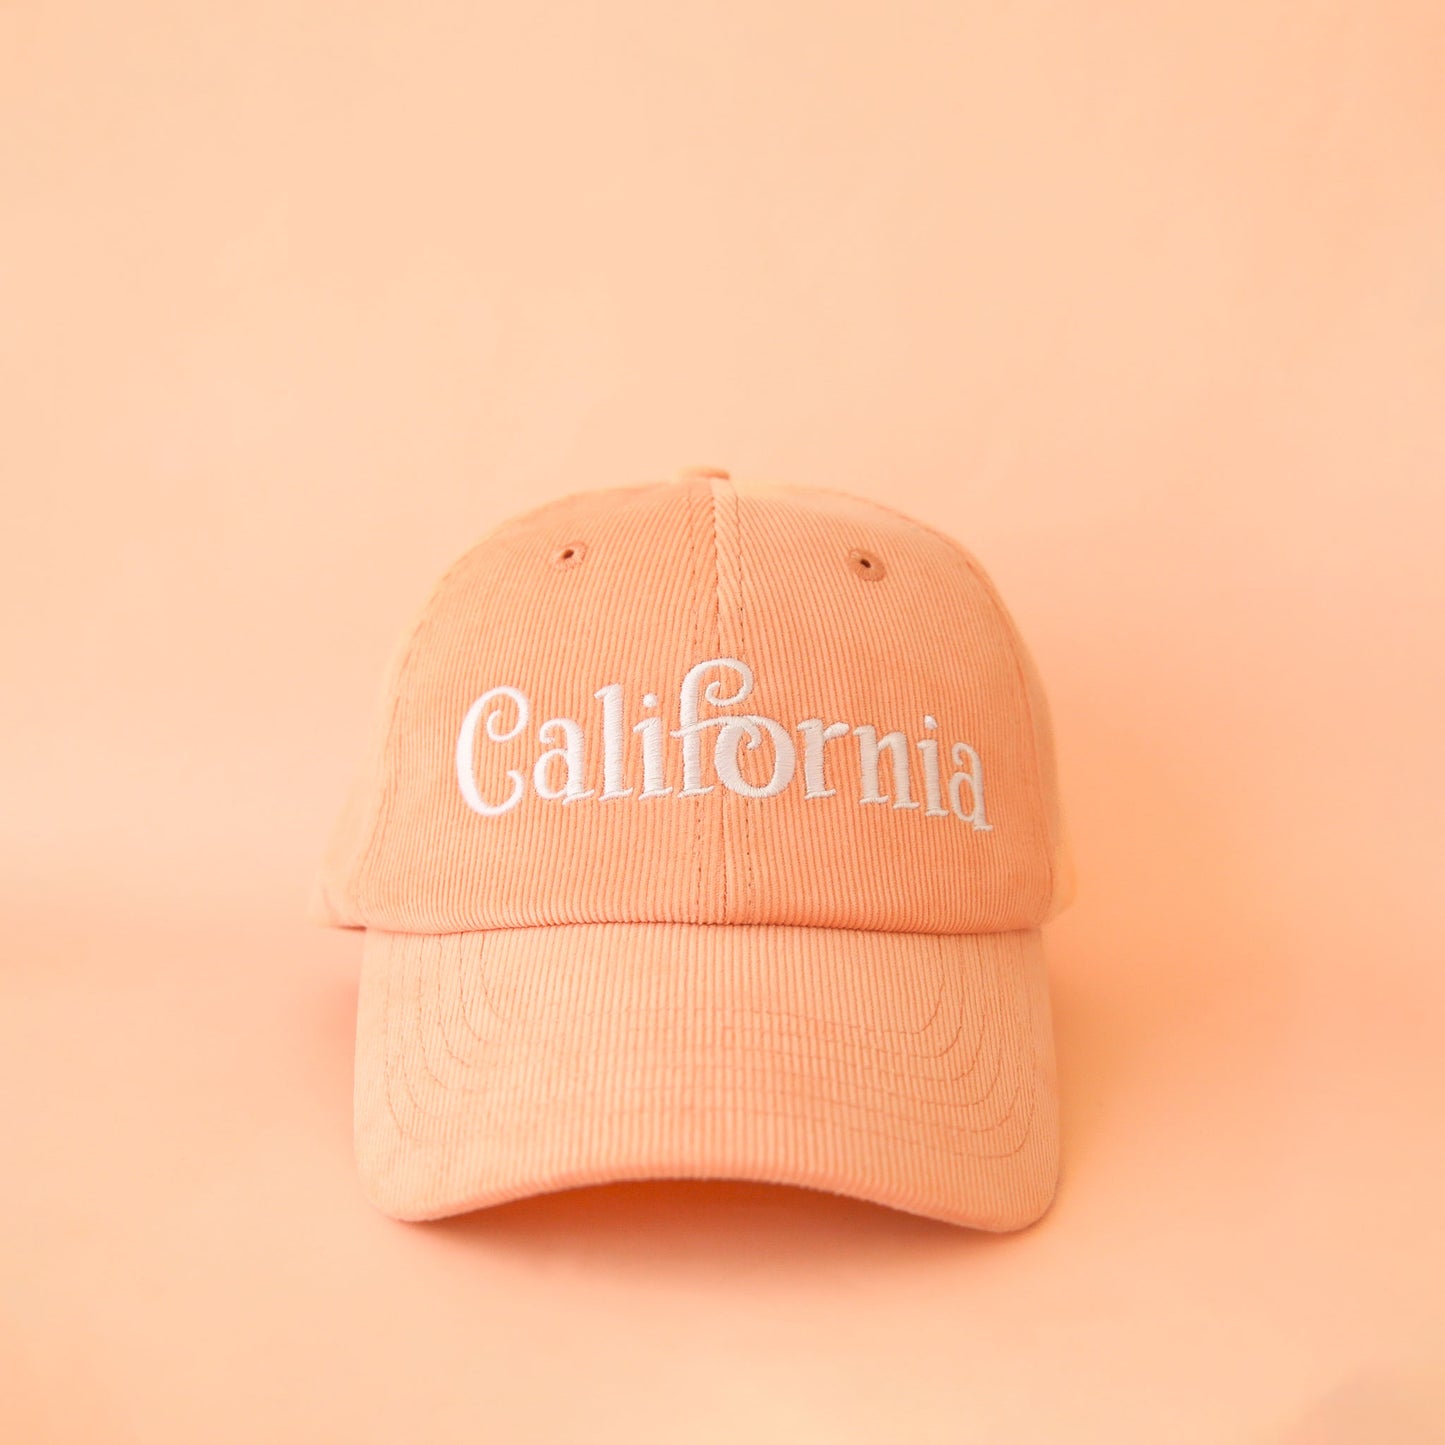 On a peach background is a peach colored baseball hat with a corduroy material and white embroidered text across the front that reads, "California". 